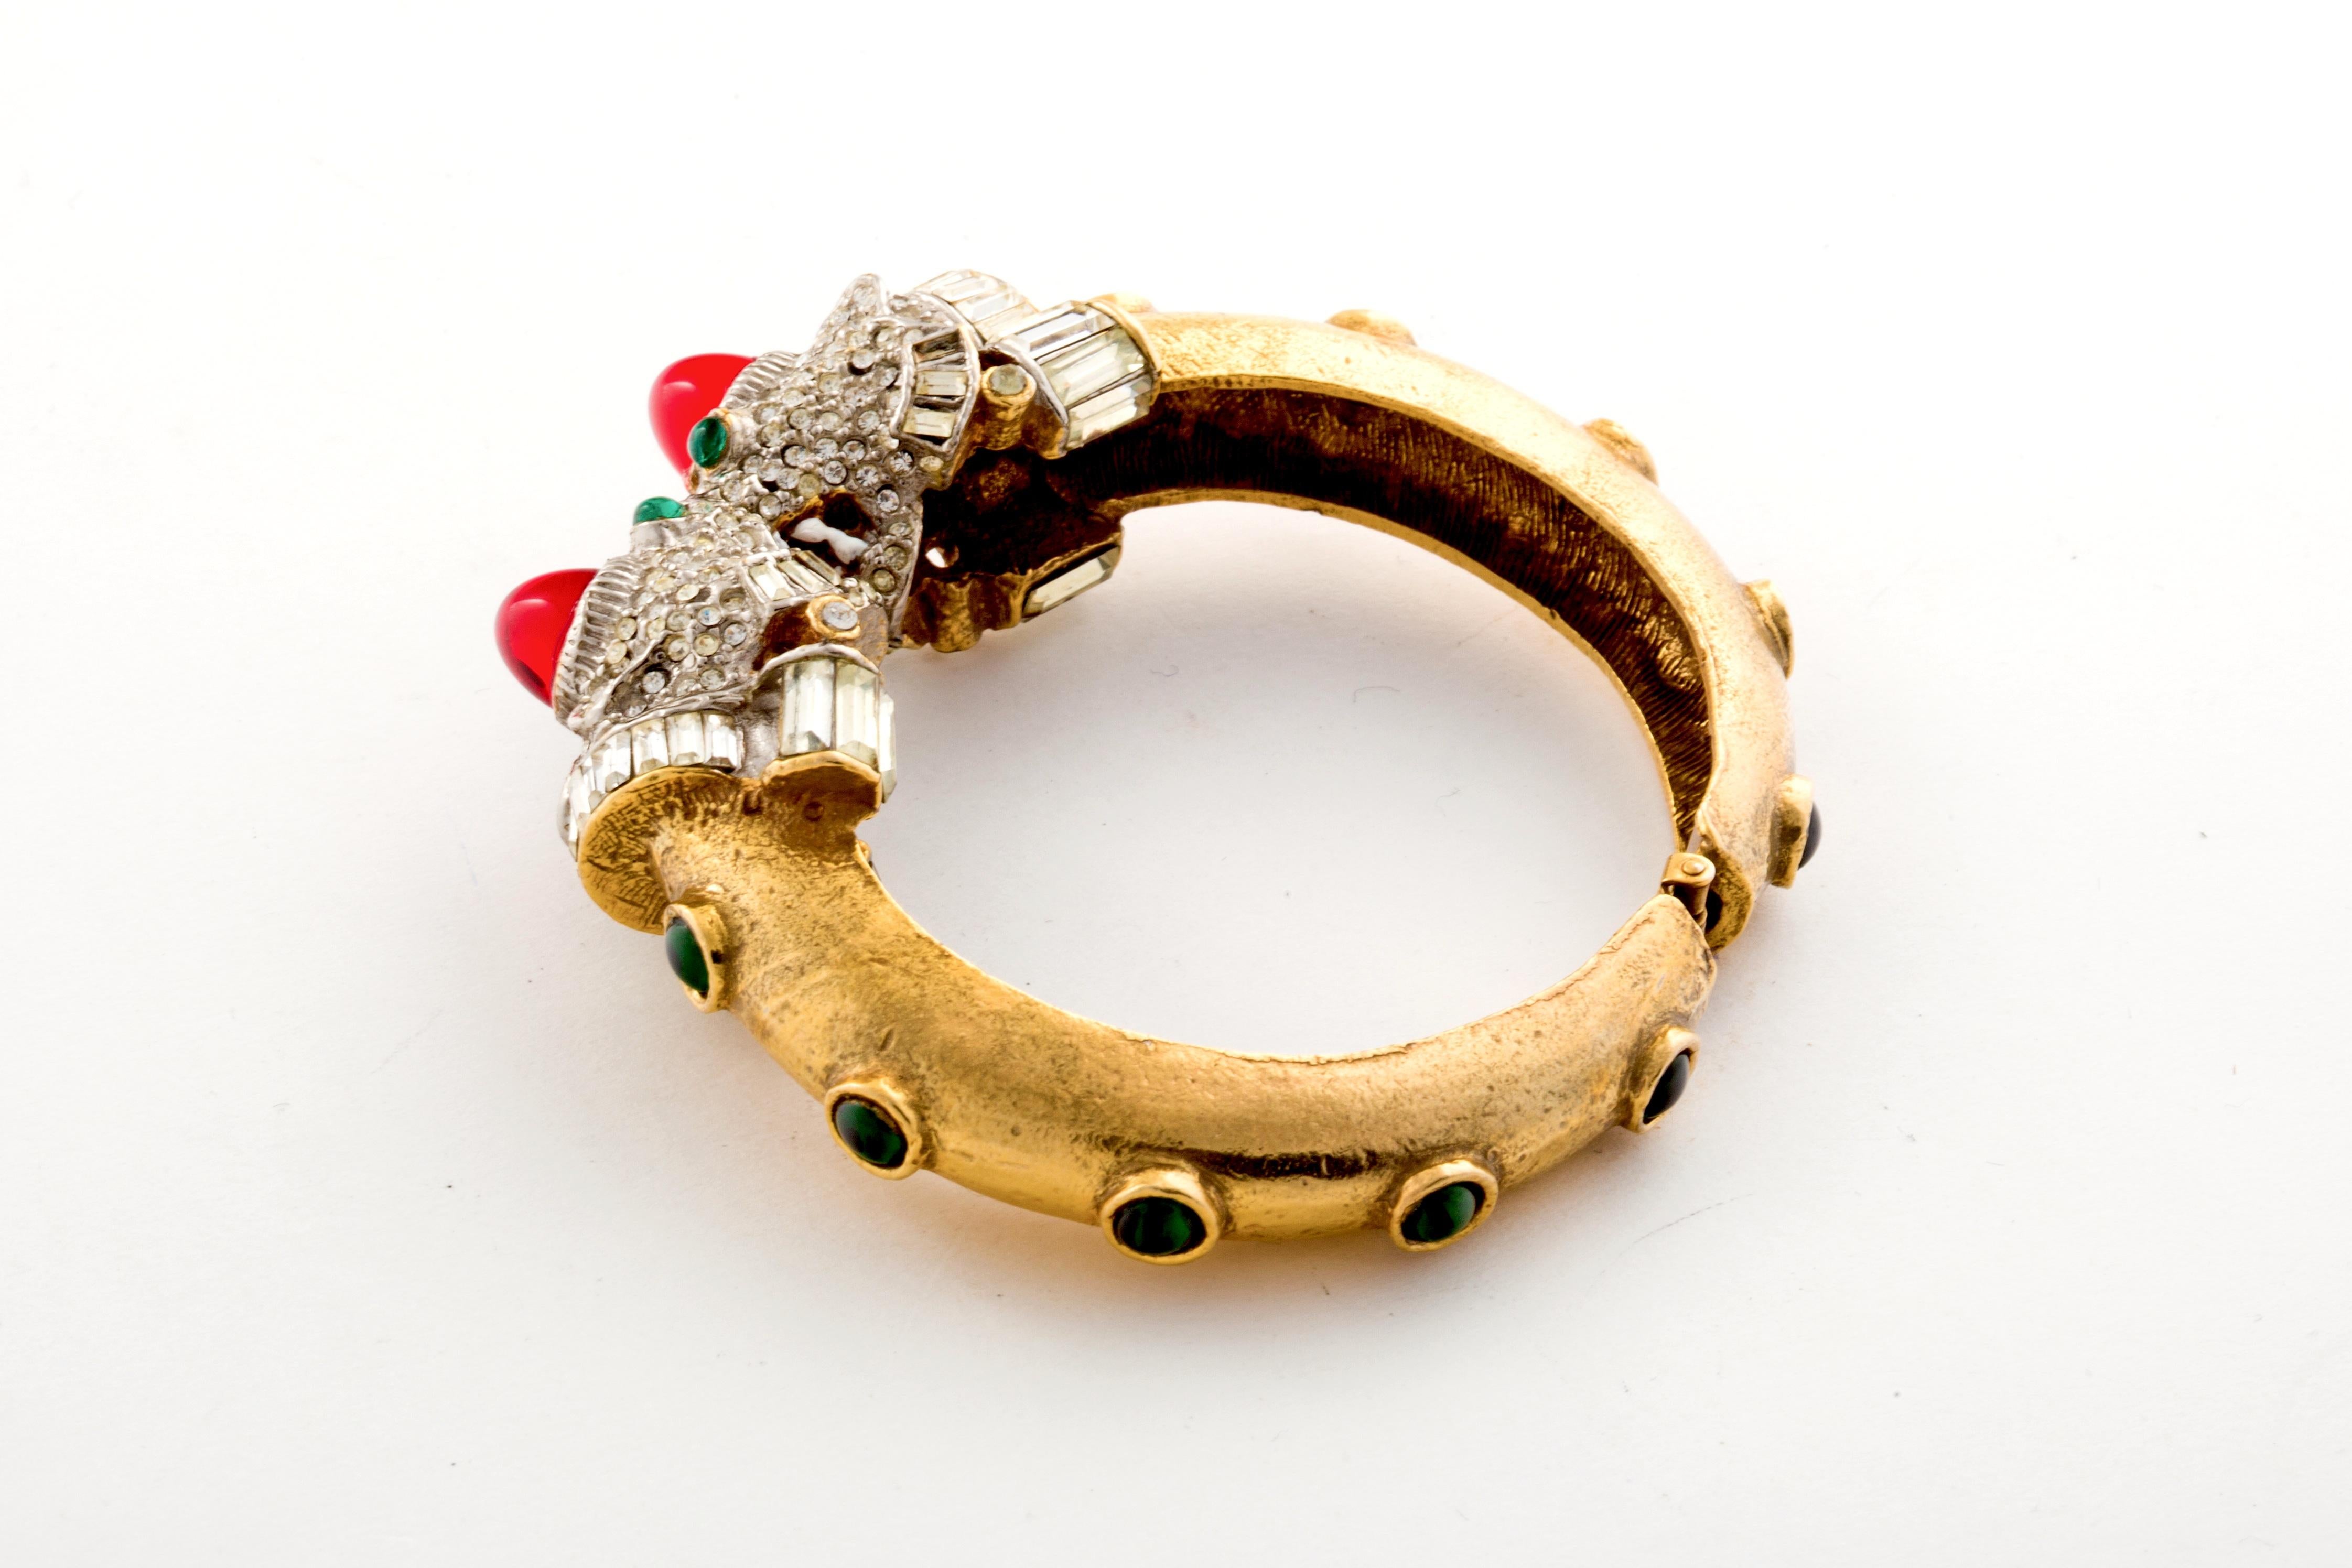 60's Kenneth J. Lane or KJL Foo Dog Bangle with a lot of fabulousness going on!  Cabochons, Emeralds and Rhinestones including both pave and a baguette cut collar on the dog!  Dark Green cabochon stones circle the bangle while his fangs and tongue